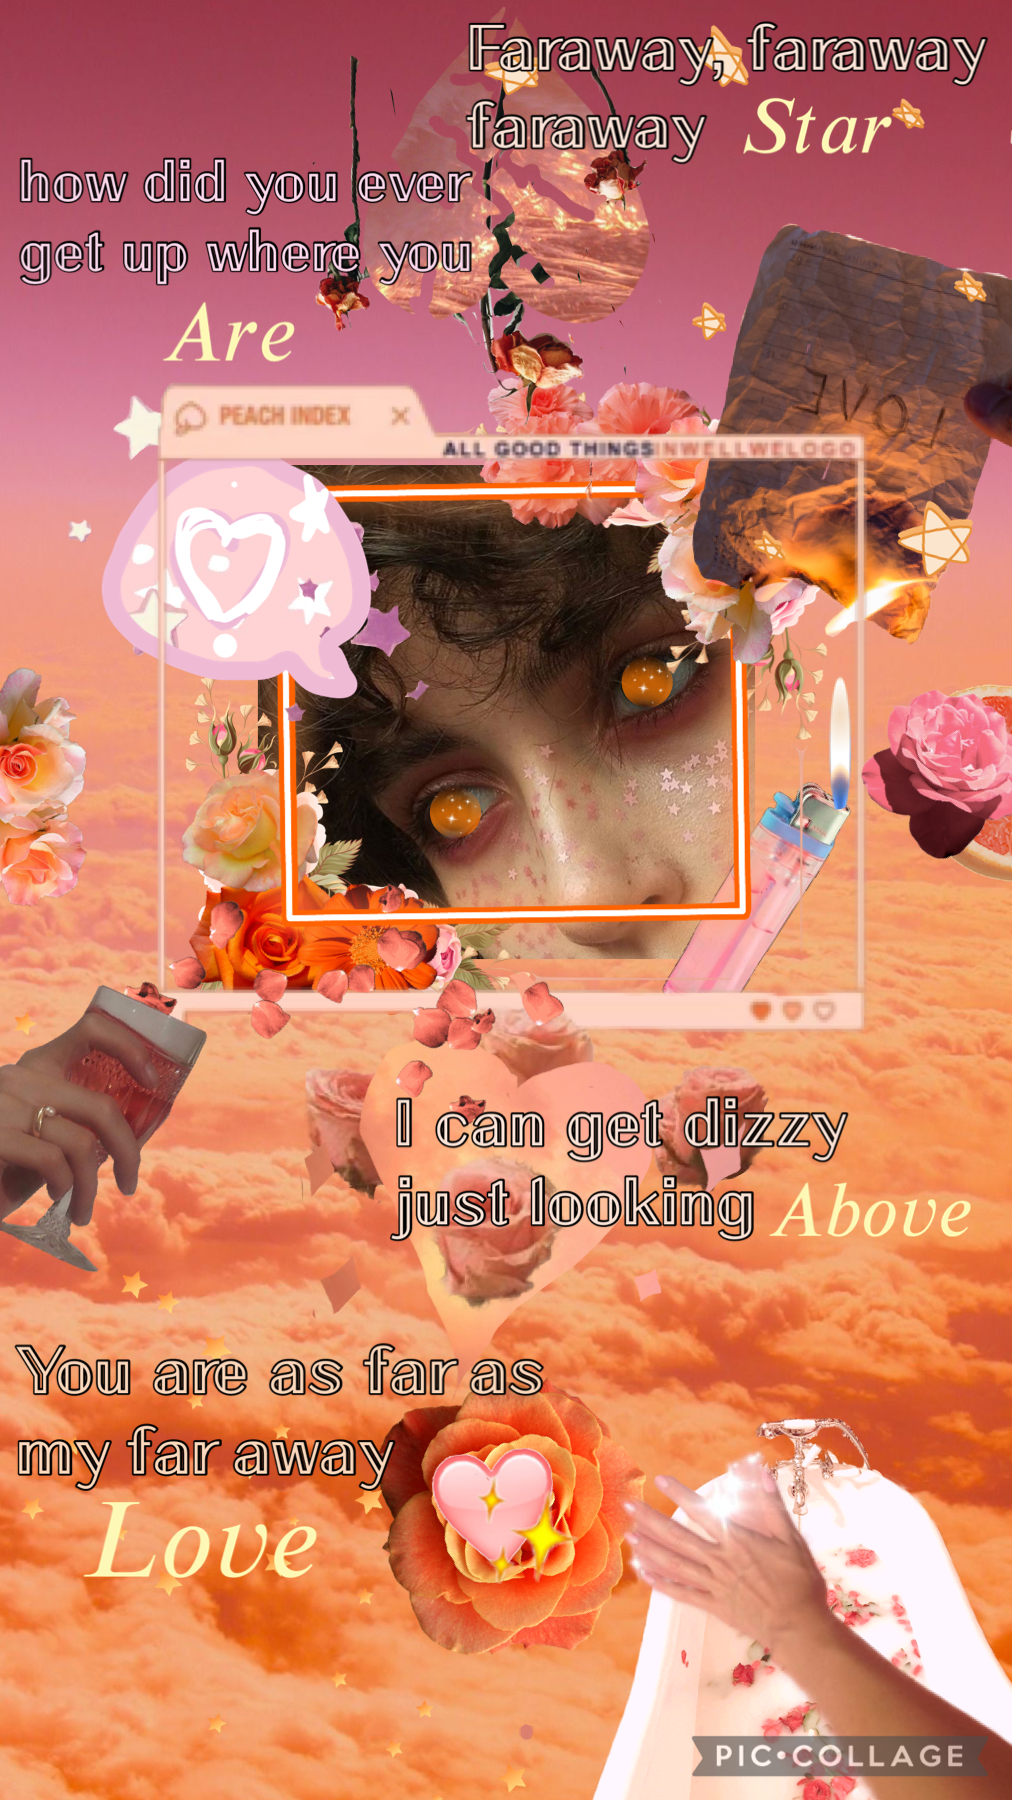 💖𝑇𝑎𝑝🧡

I made this for a competition! I’m proud of it but I feel for once there’s TOO MUCH going on. Lyrics in this from the song “Faraway Star“ By the Chordettes